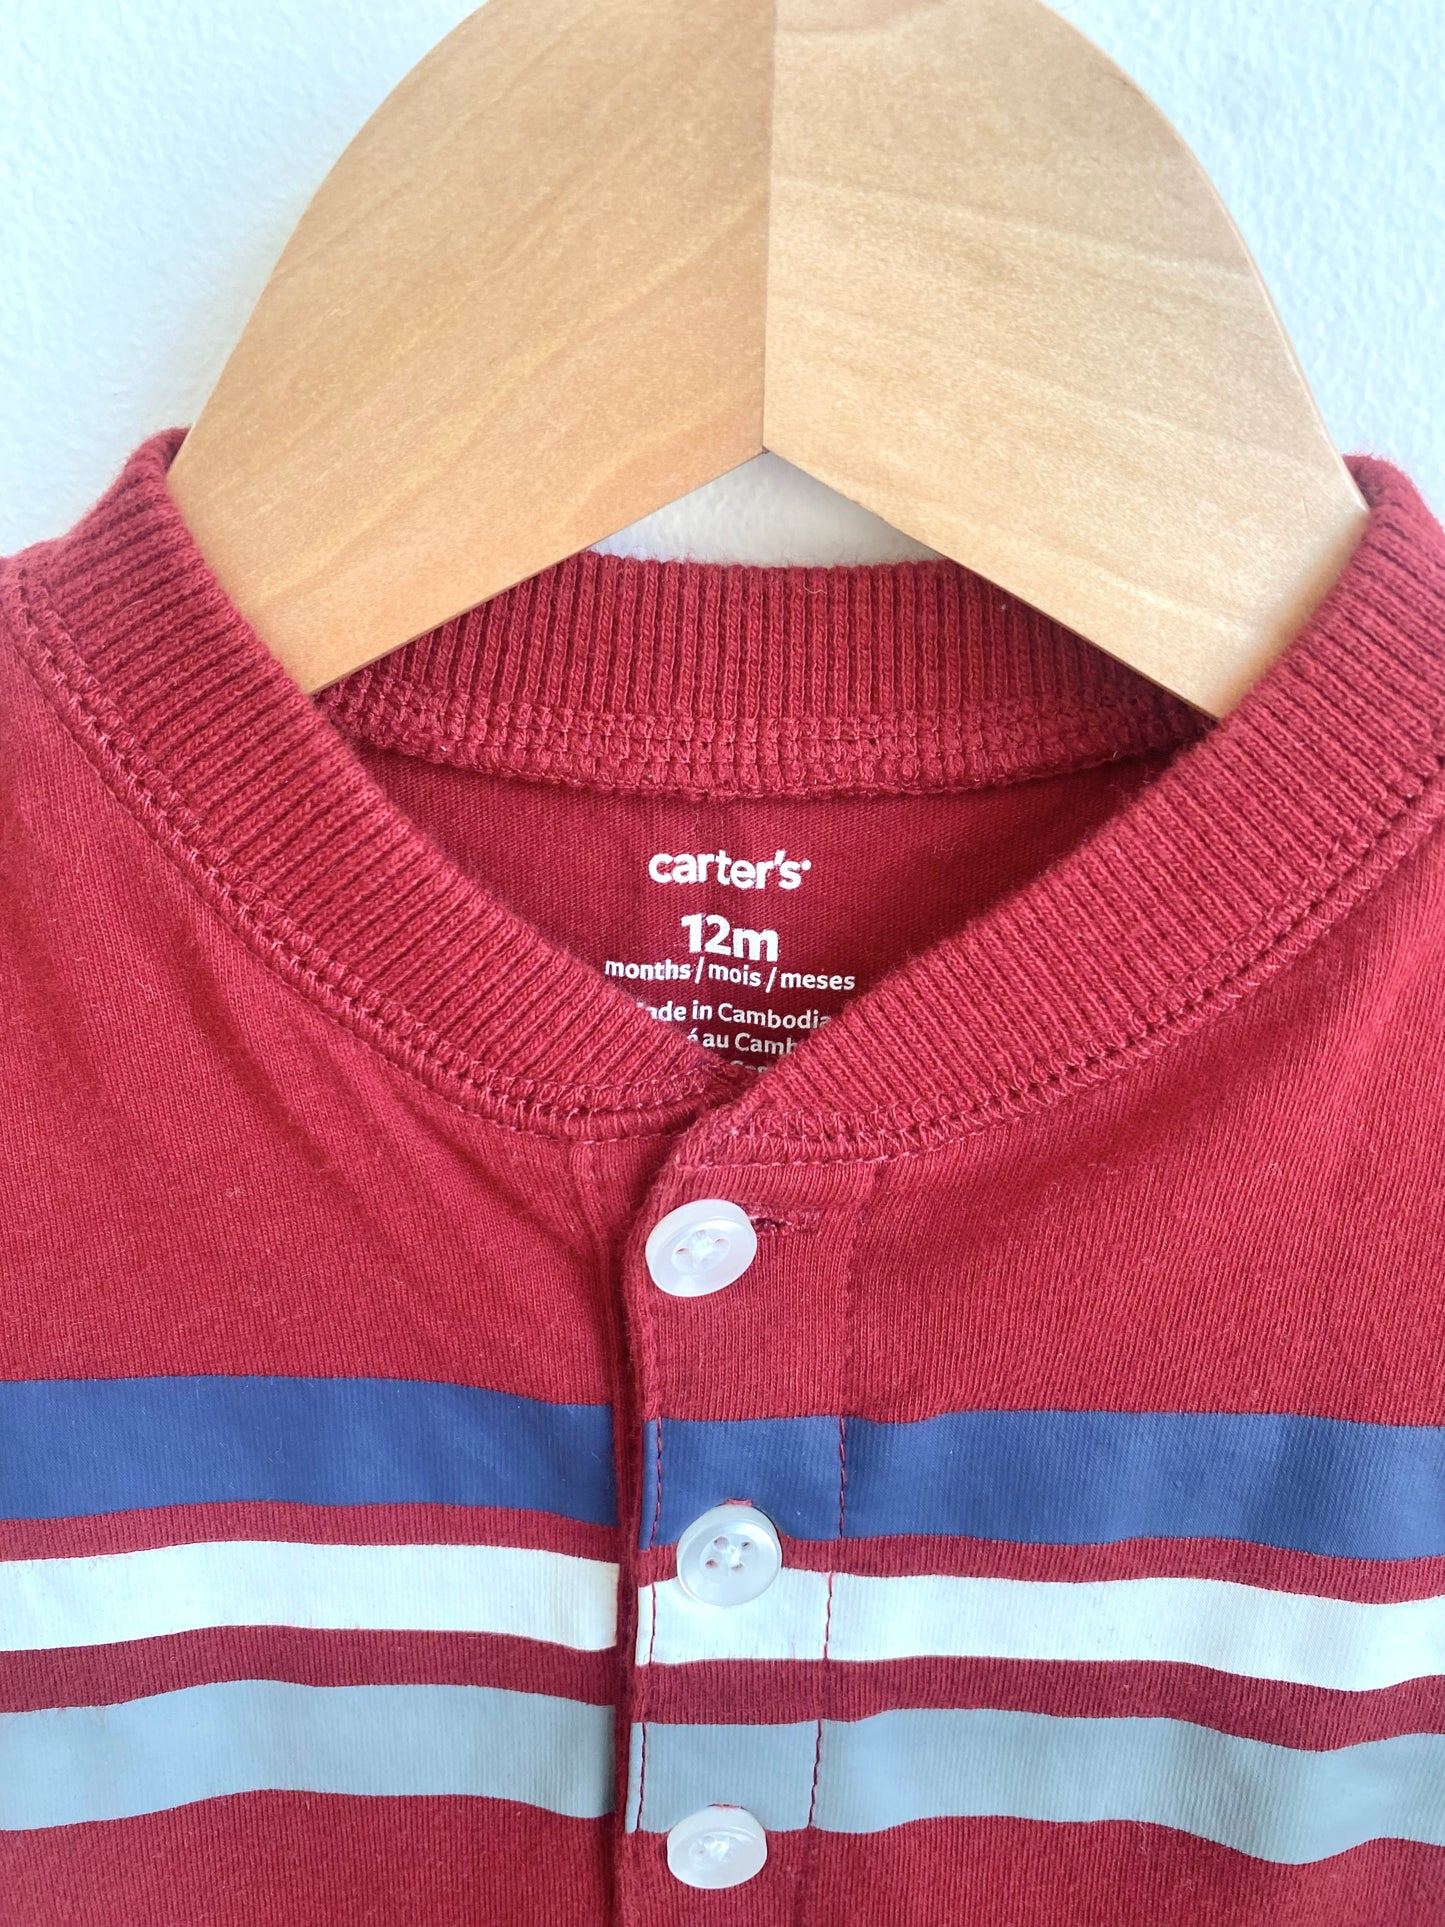 Red with Stripes Romper / 12m